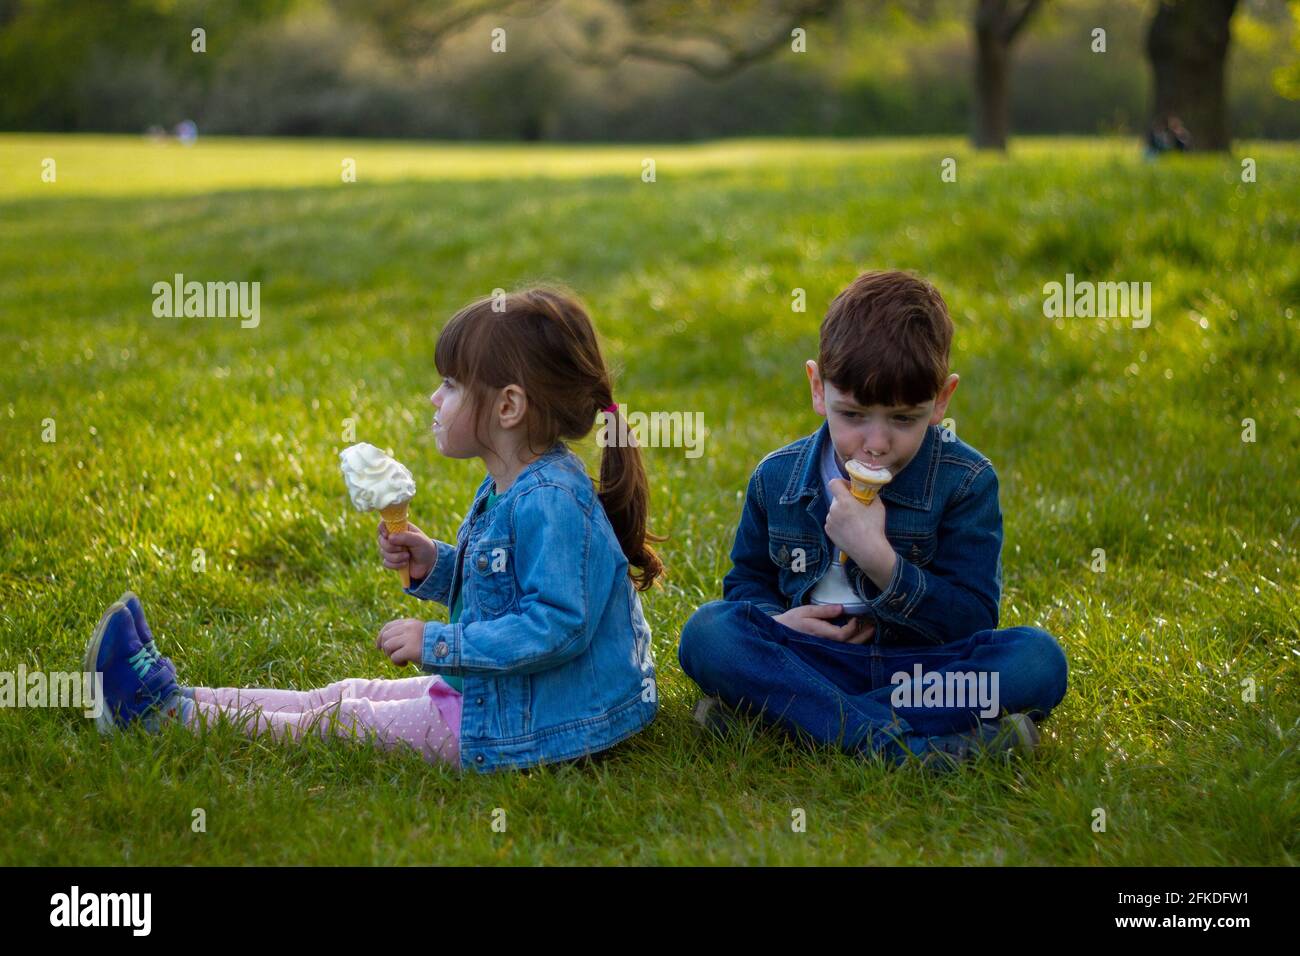 Portrait of a cute boy and a girl wearing blue jackets sitting on a lawn on a sunny day eating ice cream Stock Photo